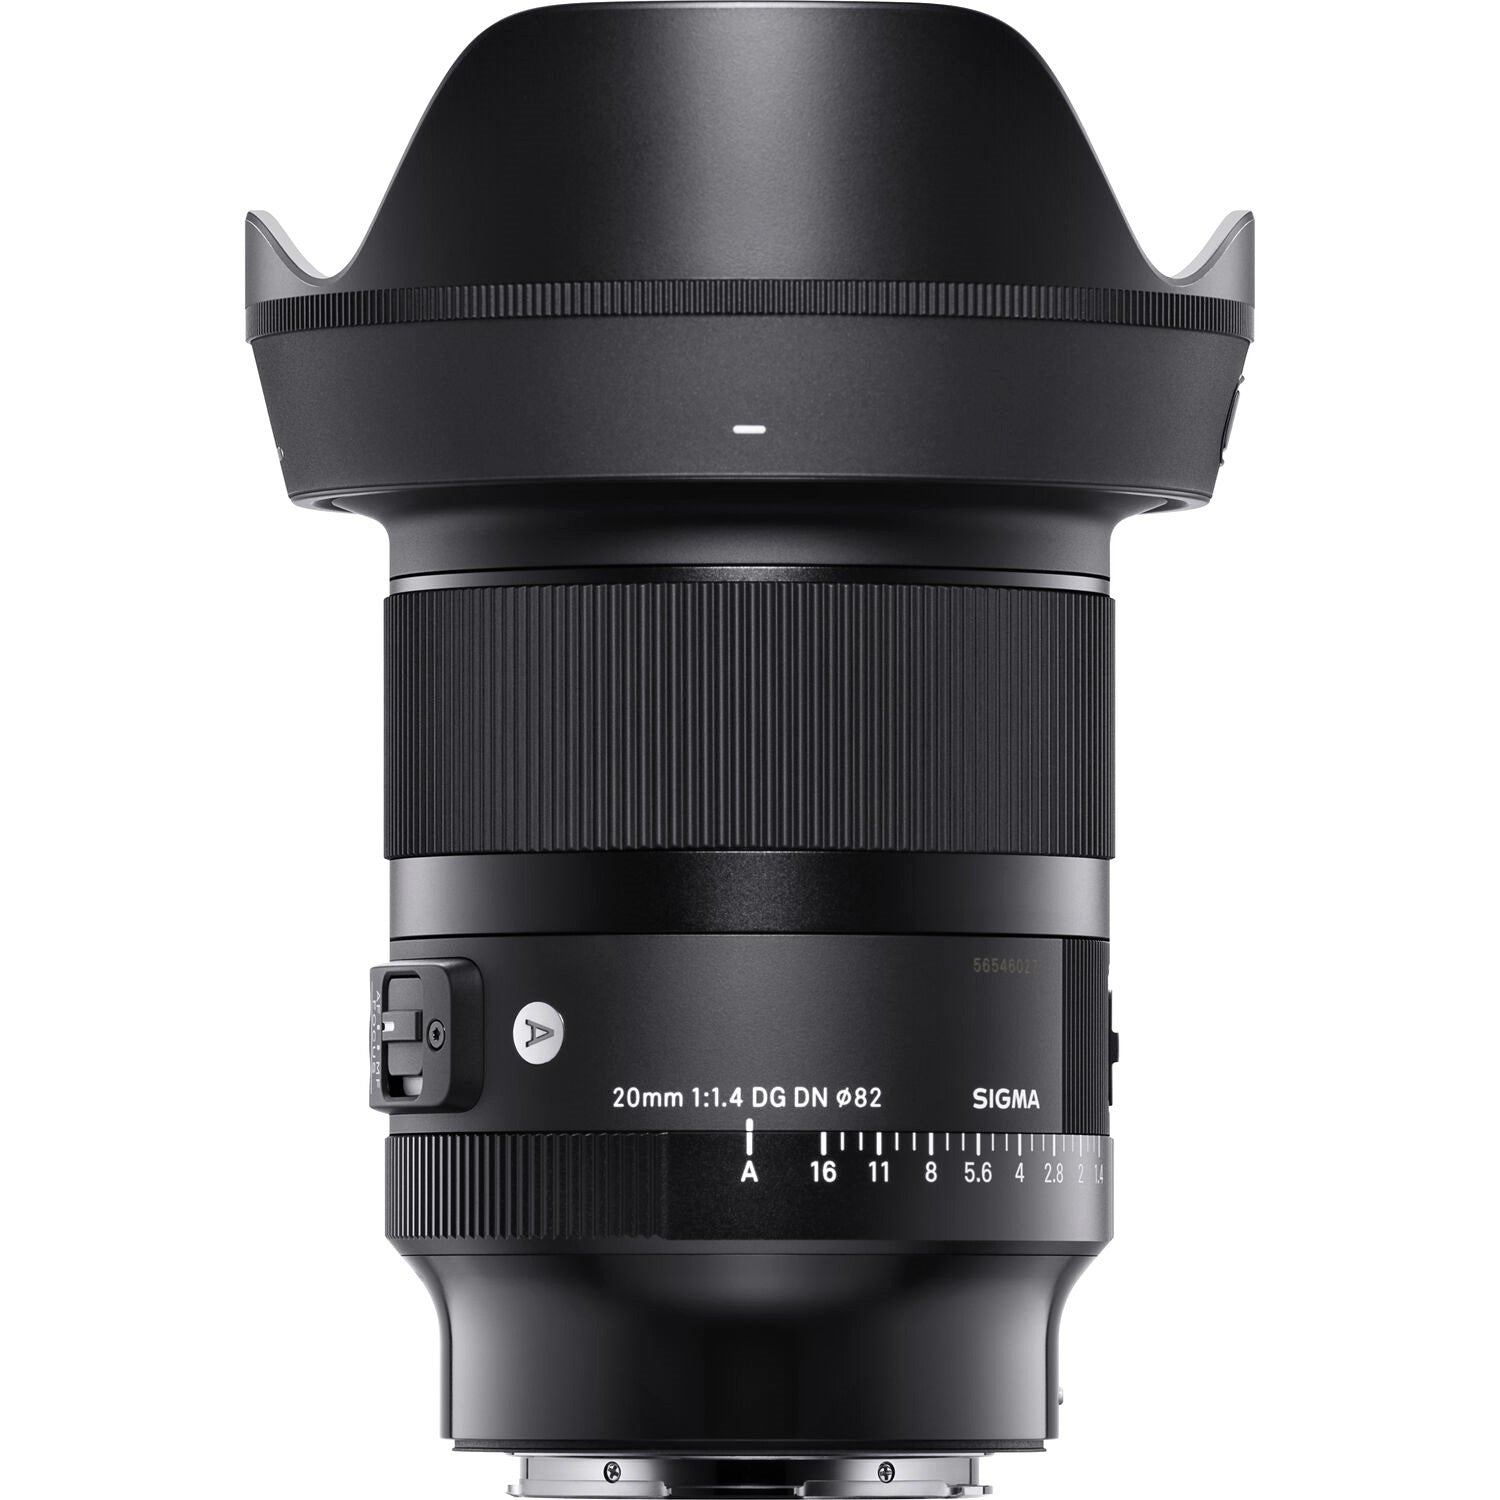 Sigma 20mm F1.4 DG DN Art Lens (Leica L Mount) with Attached Lens Hood on the Top